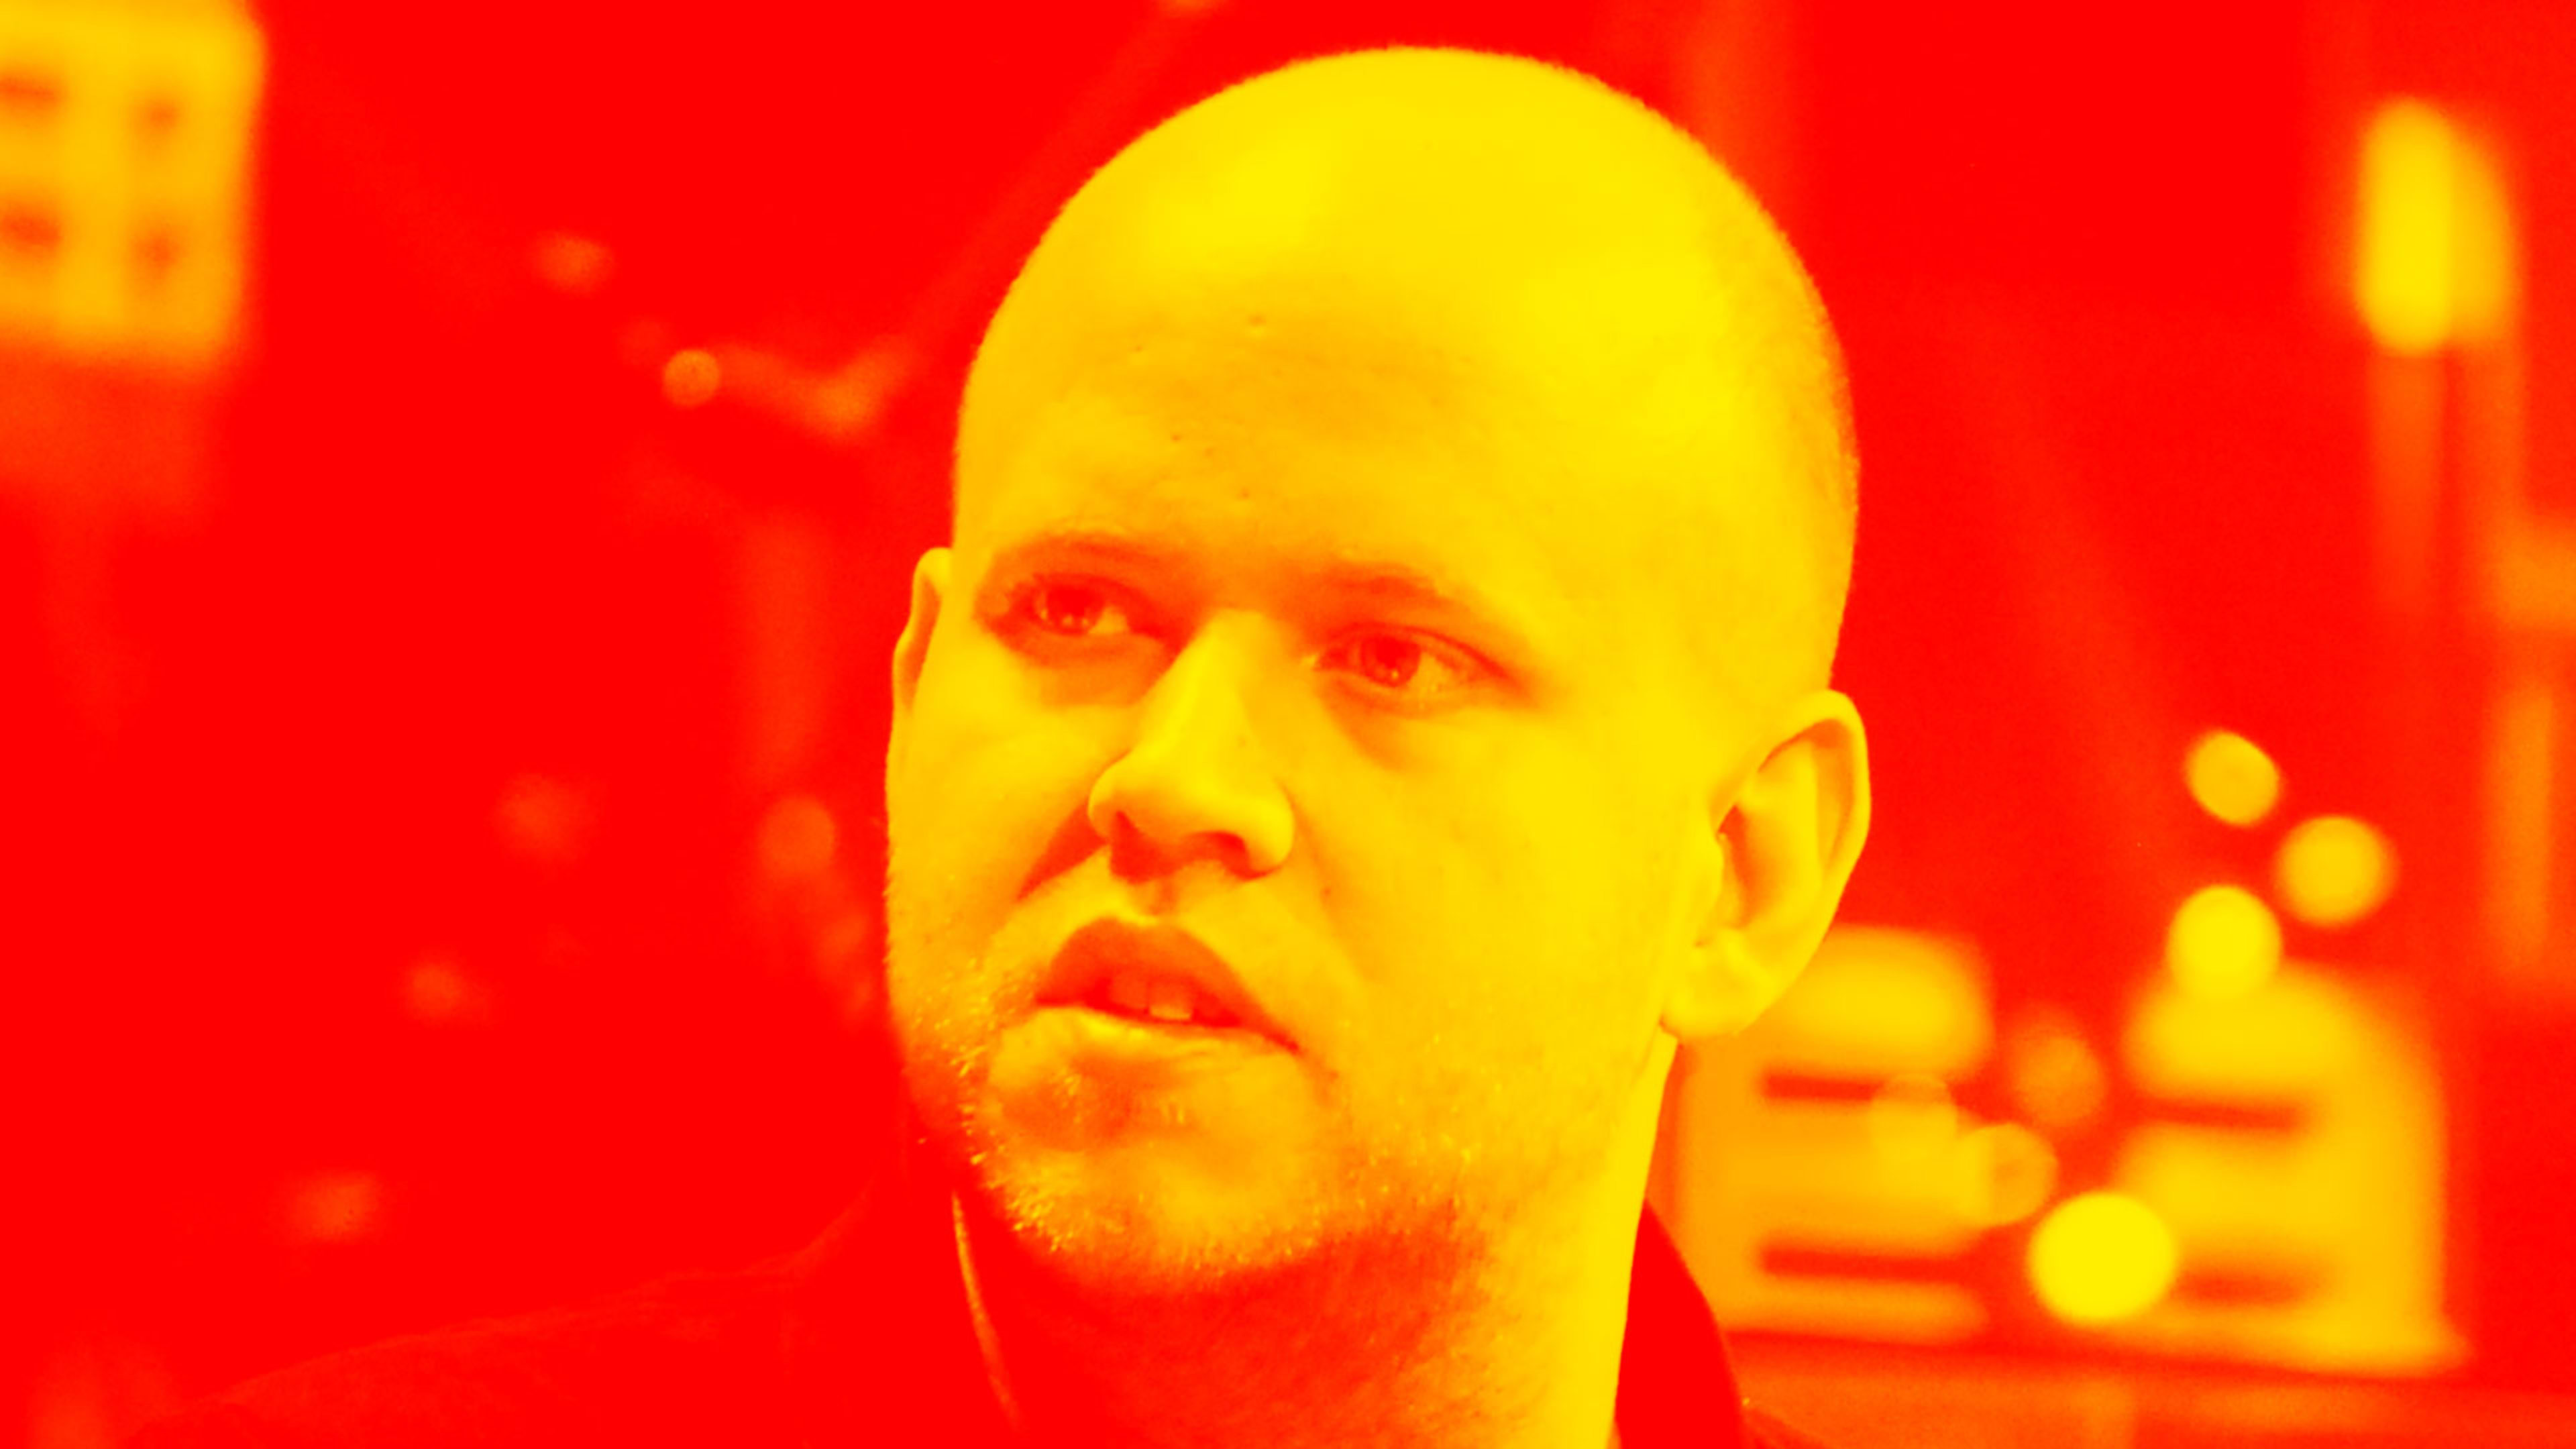 Spotify boycott: Daniel Ek’s investment in defense tech was the last straw for some artists